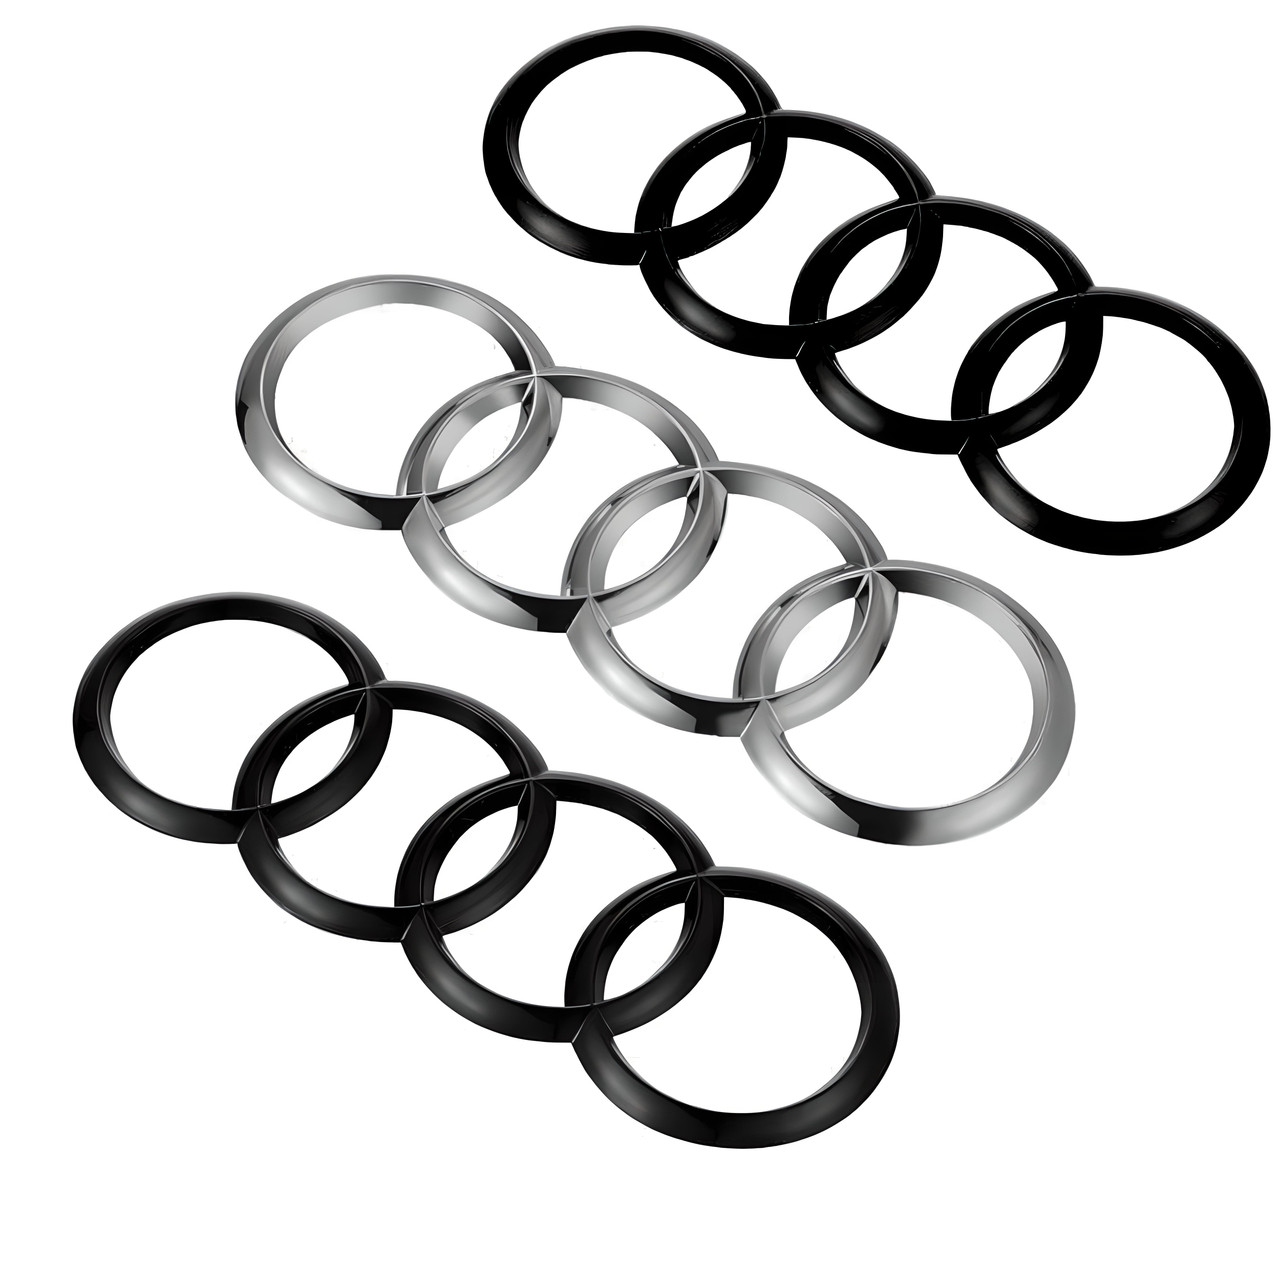 Rings Grille Front Emblem Clips 273x93mm A1 A3 S4 A5 S5 A6 S6 TT